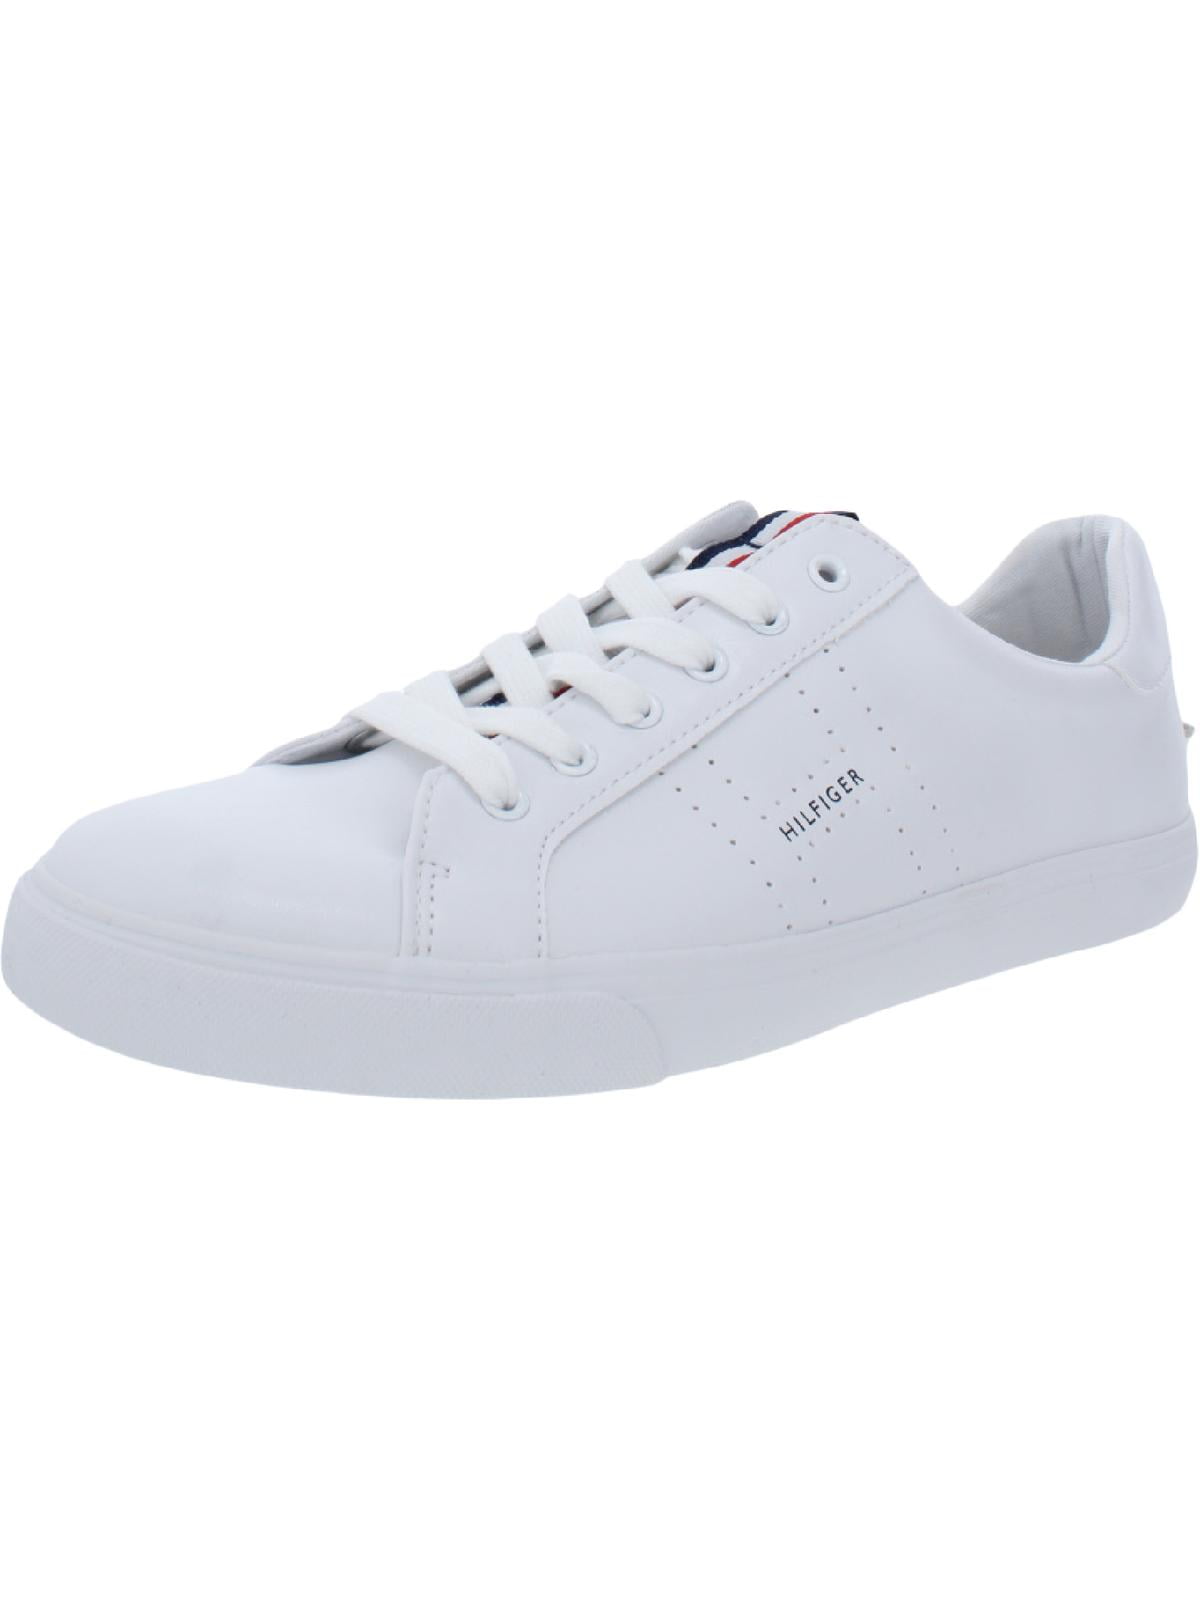 LL Cut Lamiss Hilfiger Sneakers Up (WHITE Tommy 7.5) Icon Lace Fashion LL, Low White Stripe